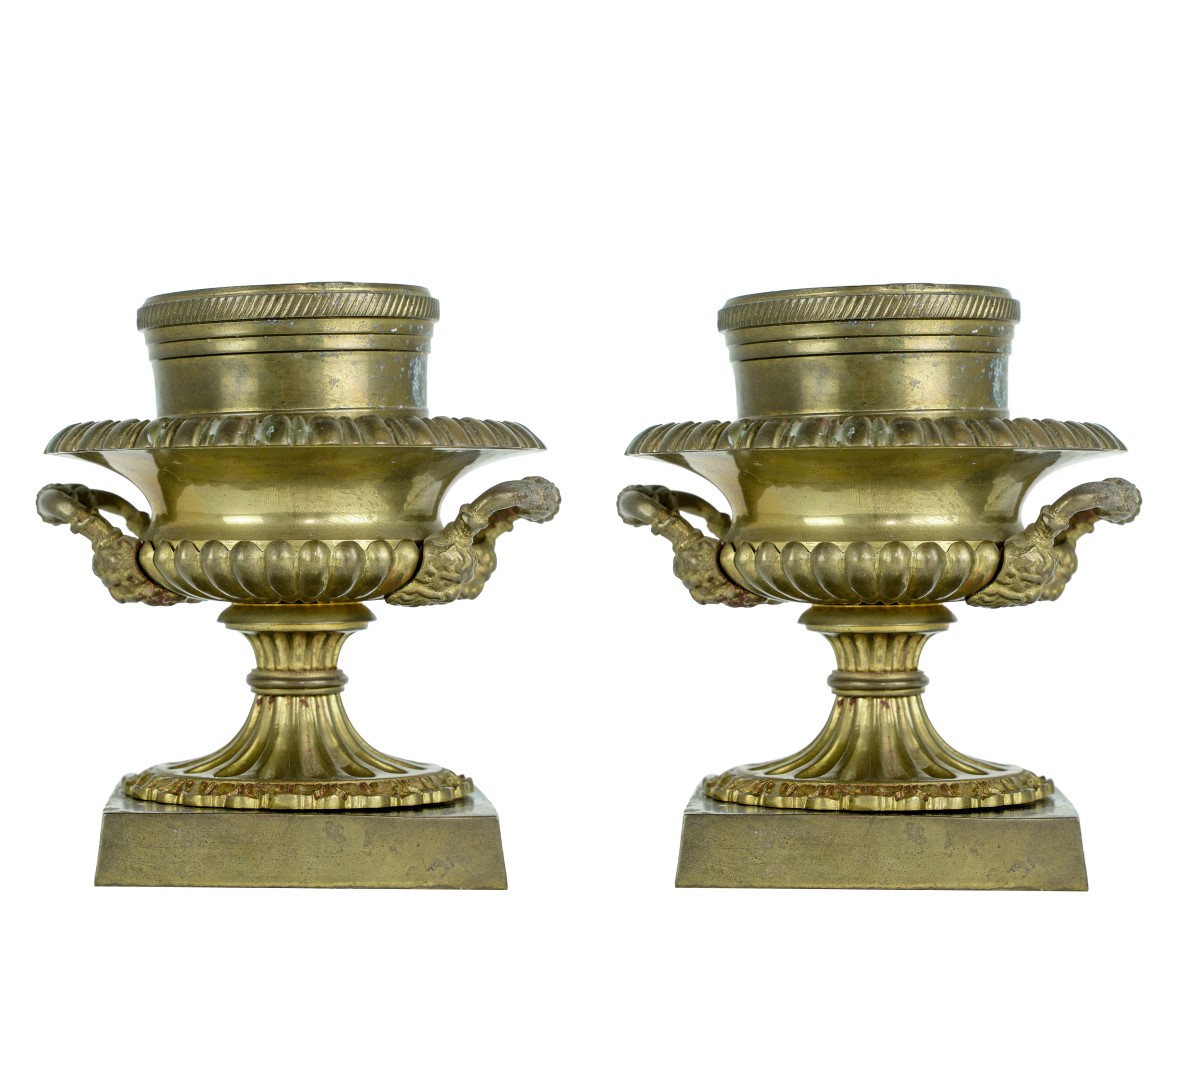 Vintage Mottahedeh Brass Candlestick Holders - a Pair